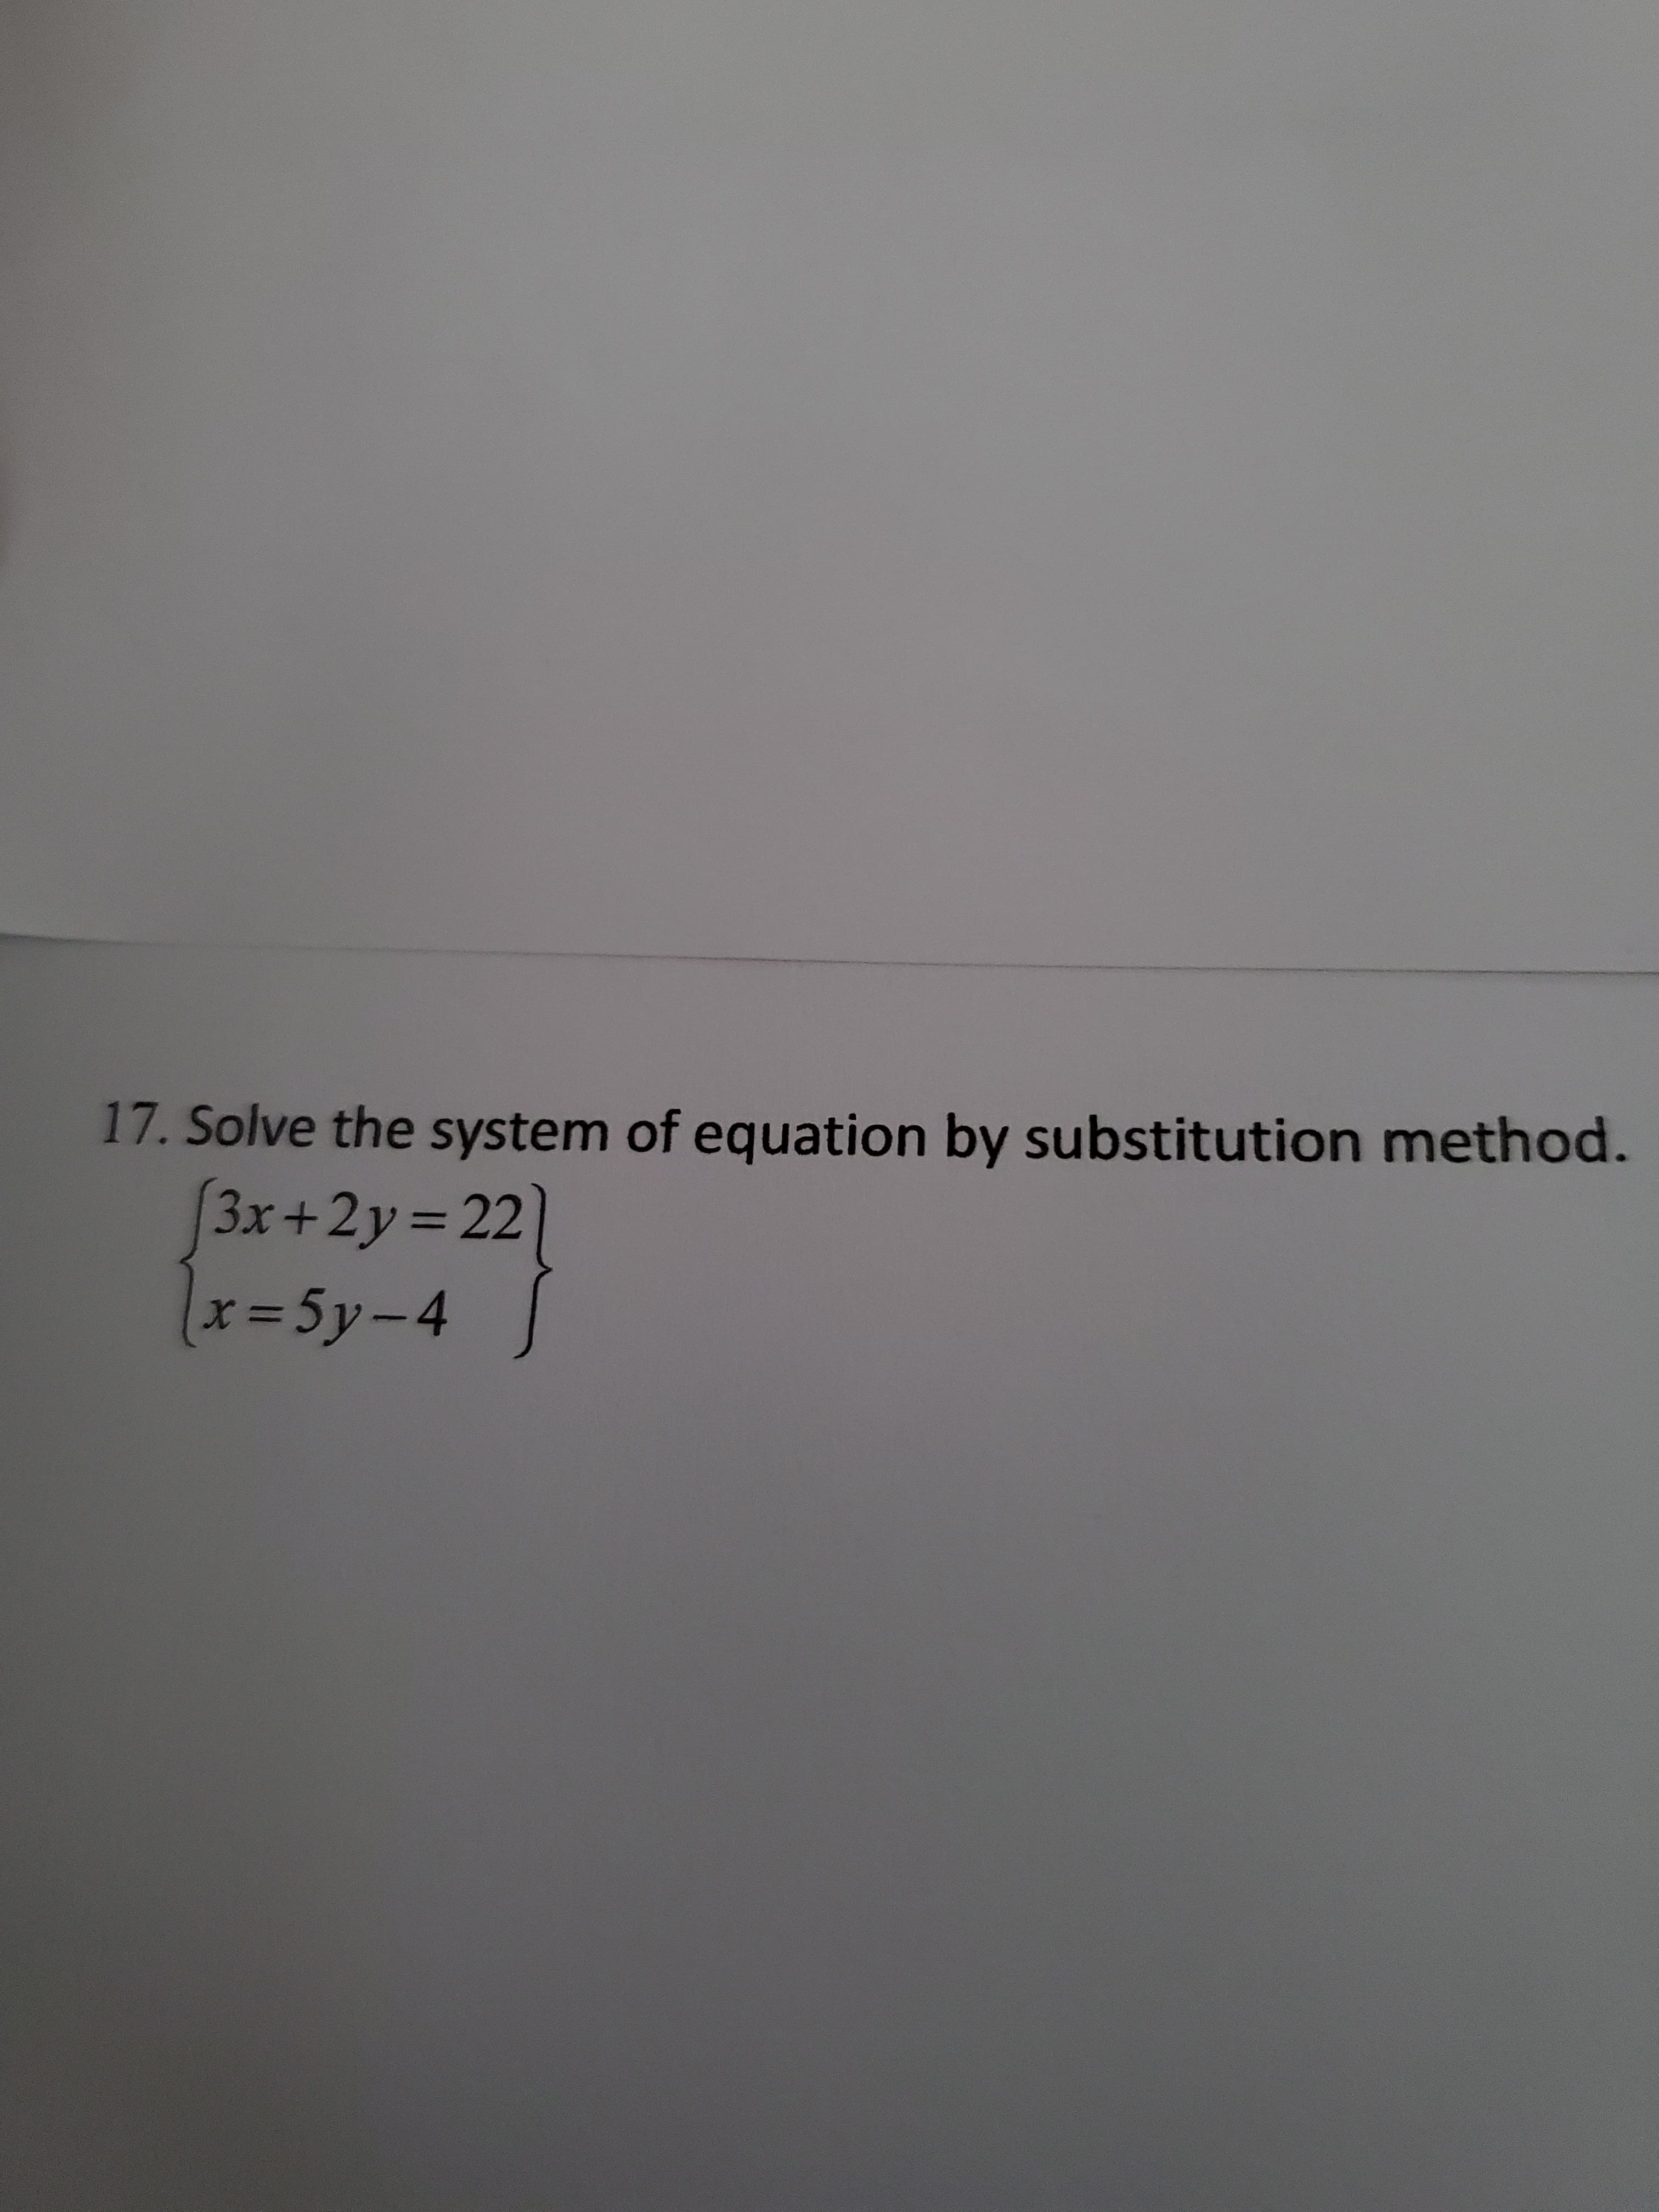 Solve the system of equation by substitution method.
(3x+2y 22]
x=5y-4
%3D
|
